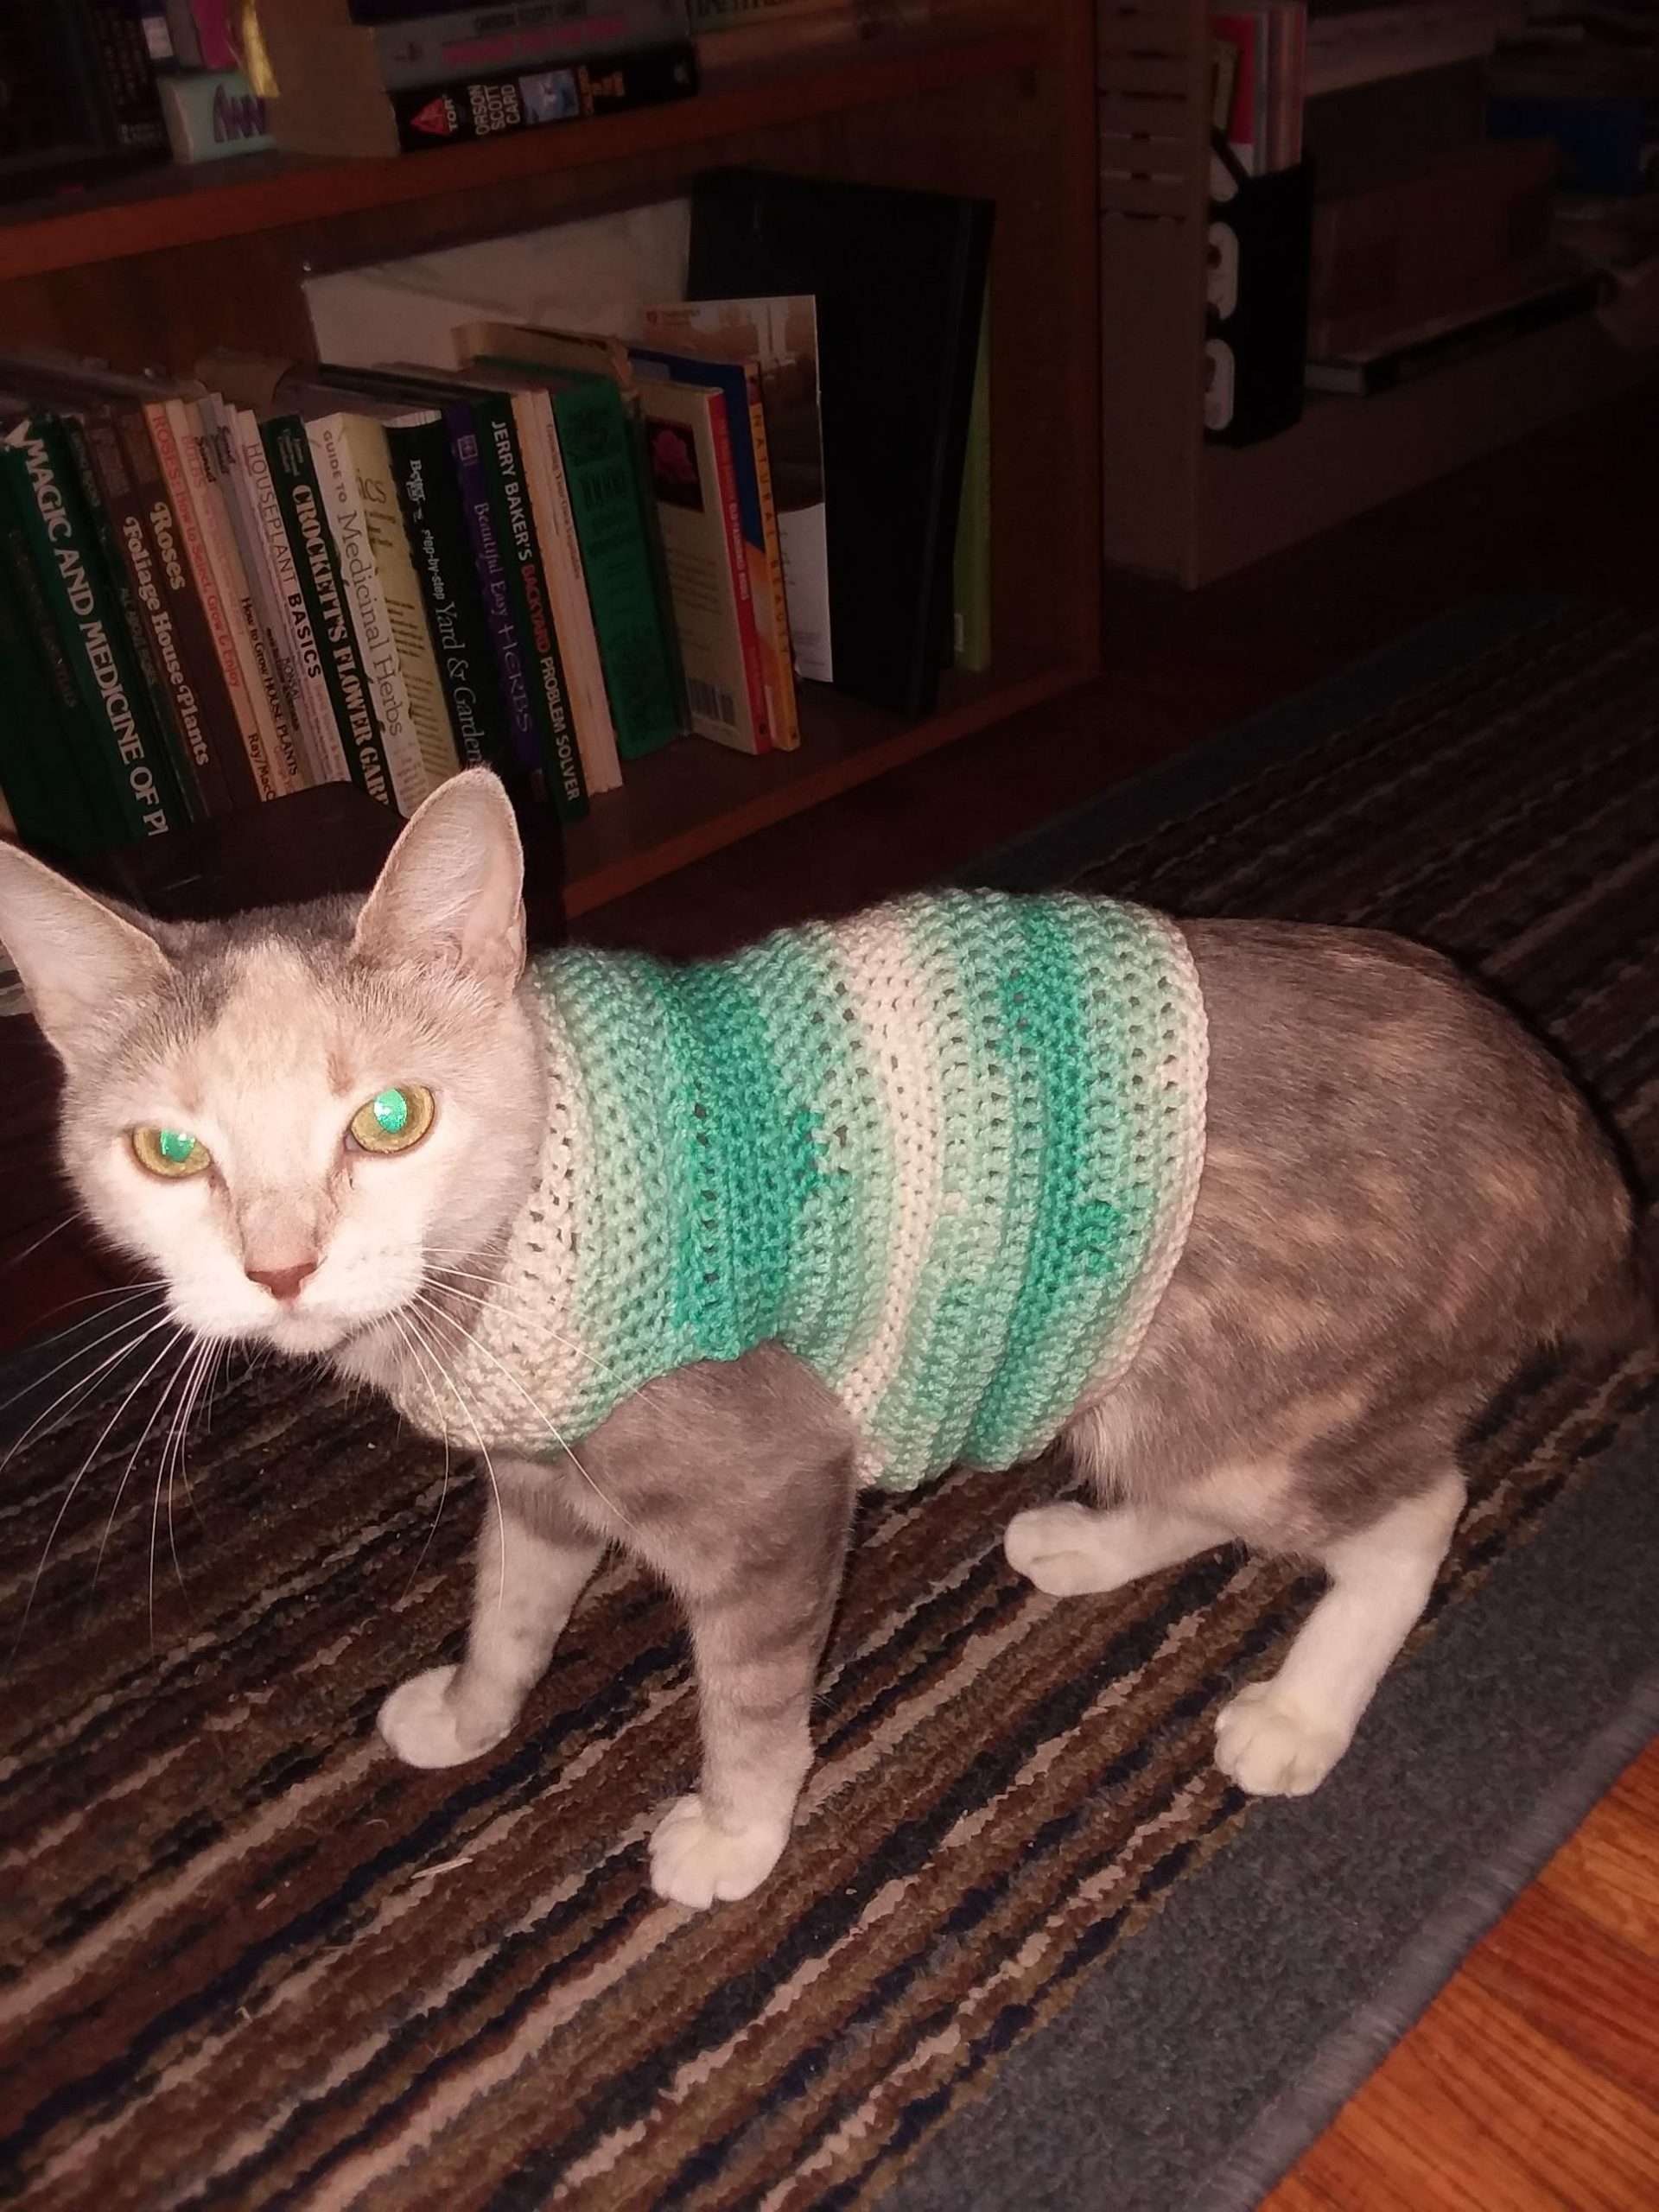 I crochet a cat sweater. Its safe to say she doesn